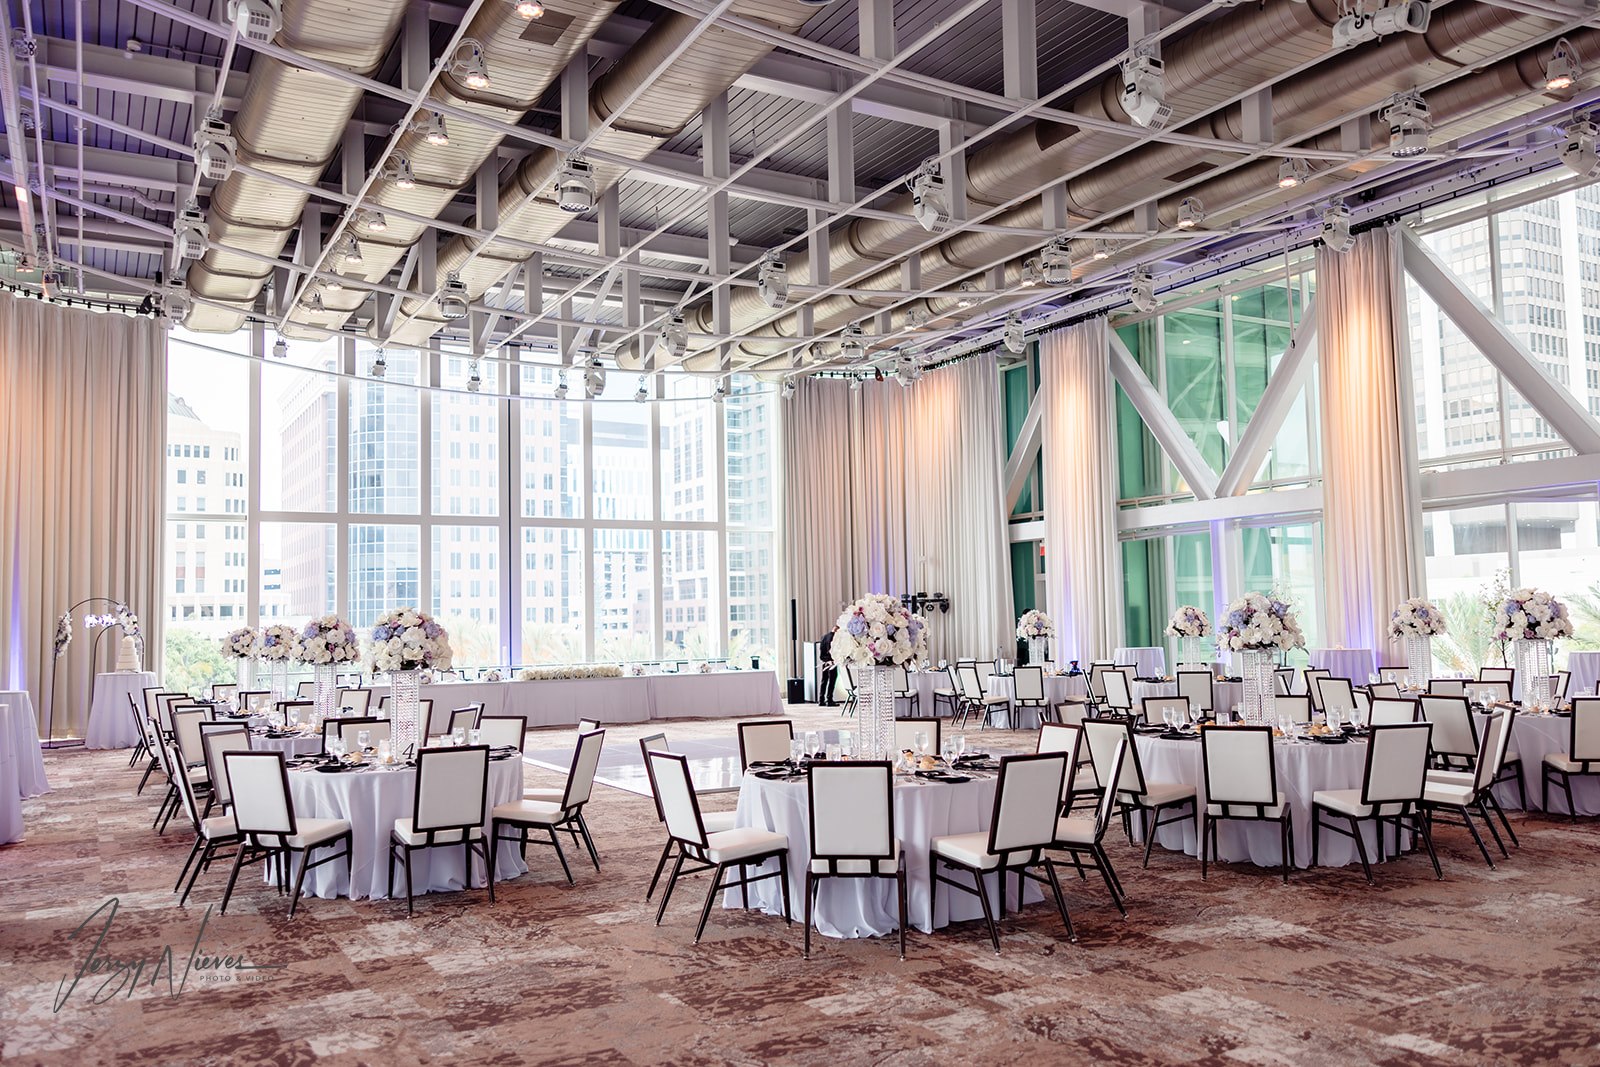 Wide shot of the reception area at the Dr. Phillips Center for Performing Arts, illuminated by natural light streaming through large windows, showcasing white tablecloths, chairs, and floral arrangements.